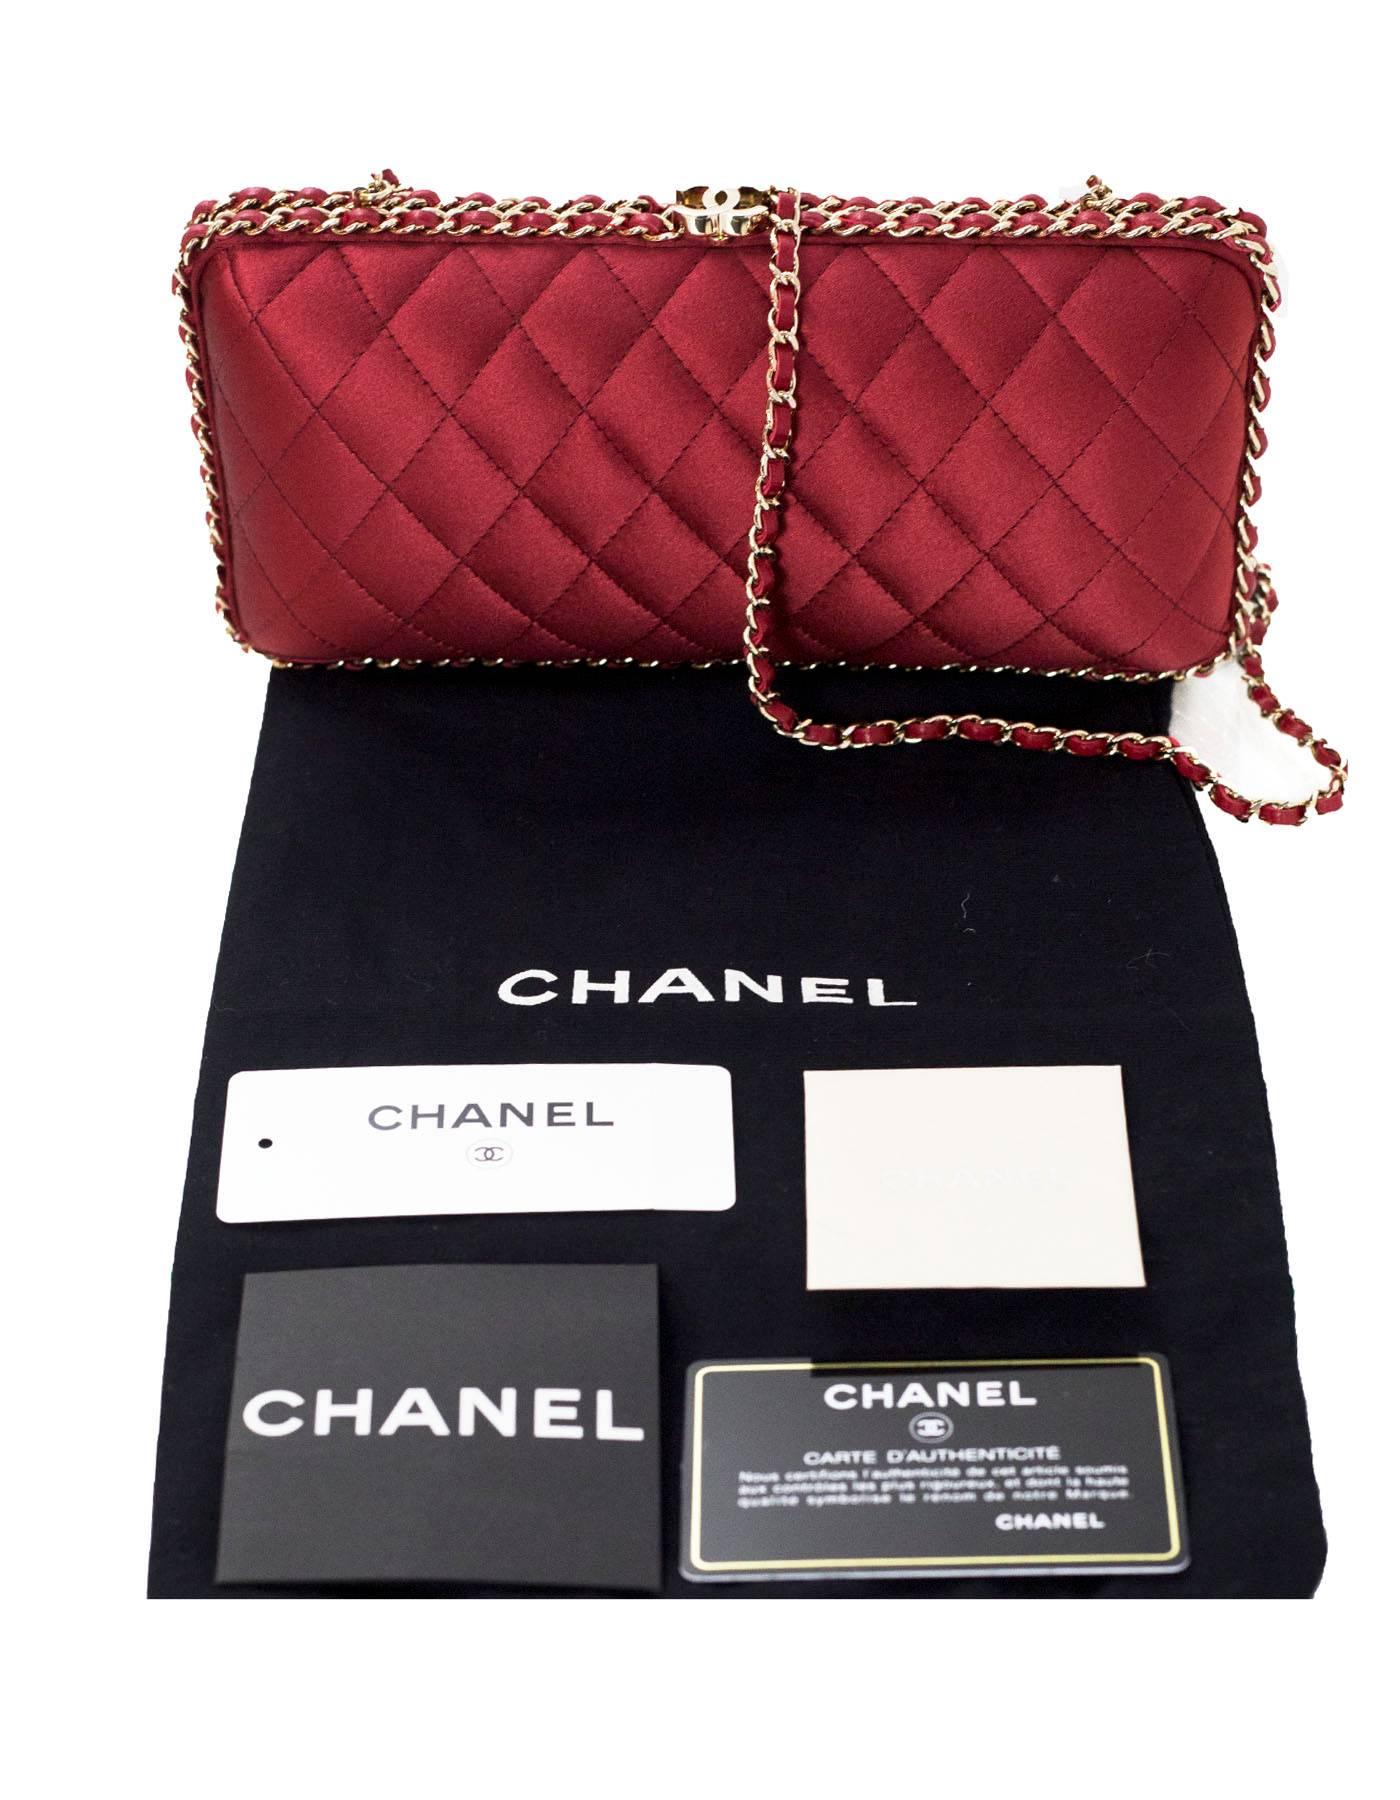 Chanel Rust Red Quilted Satin Chain Around Box Clutch/ Evening Crossbody Bag  5